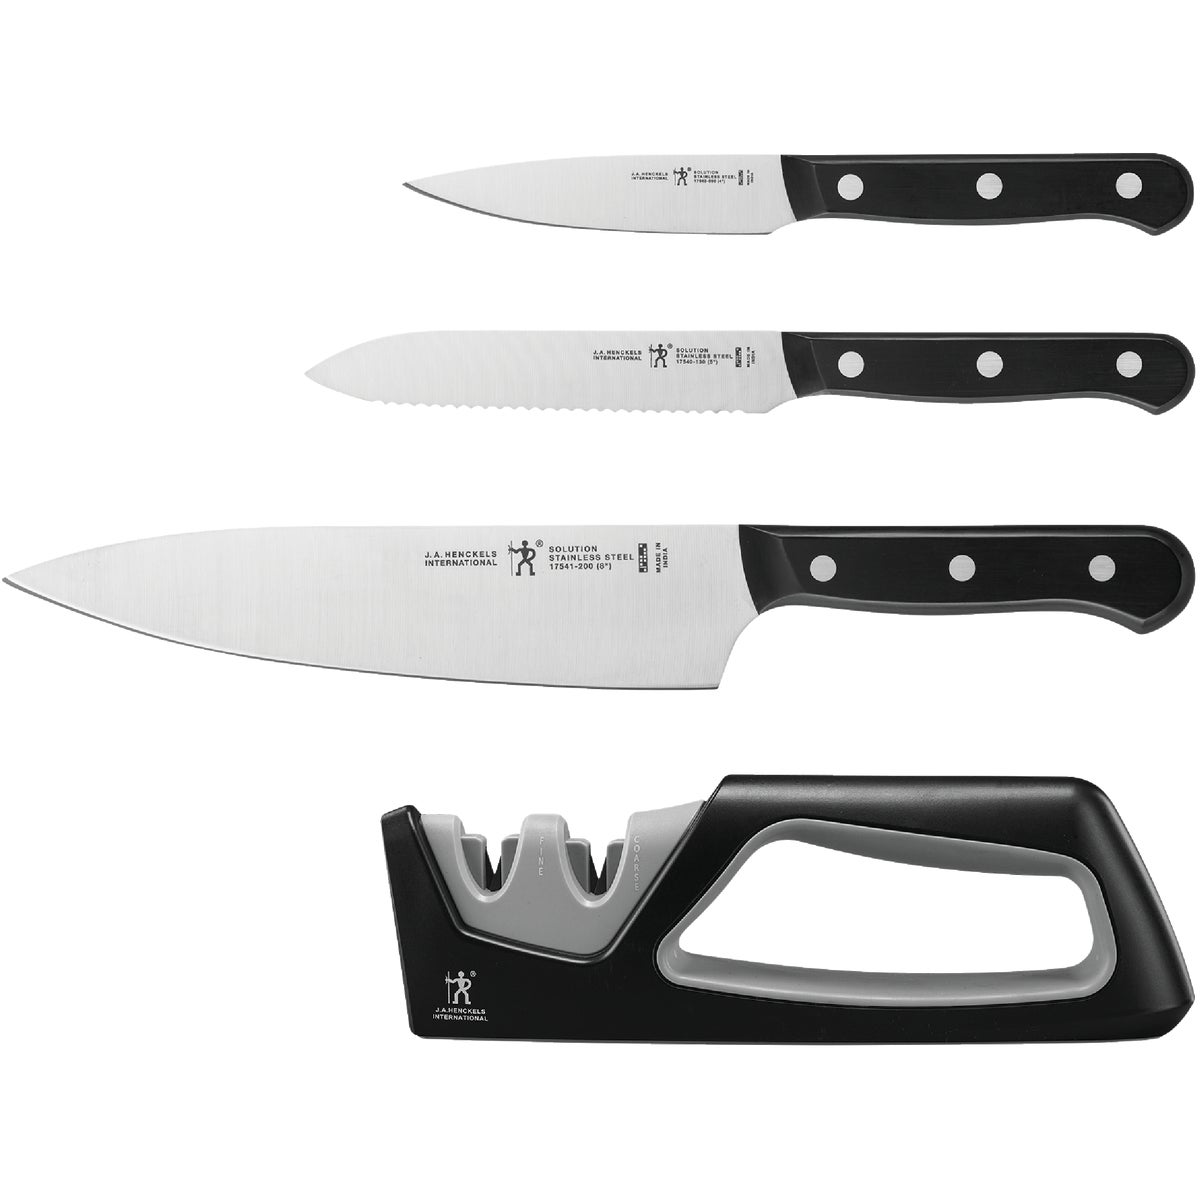 Item 619938, High carbon stainless steel knife blades stay sharper longer and are highly